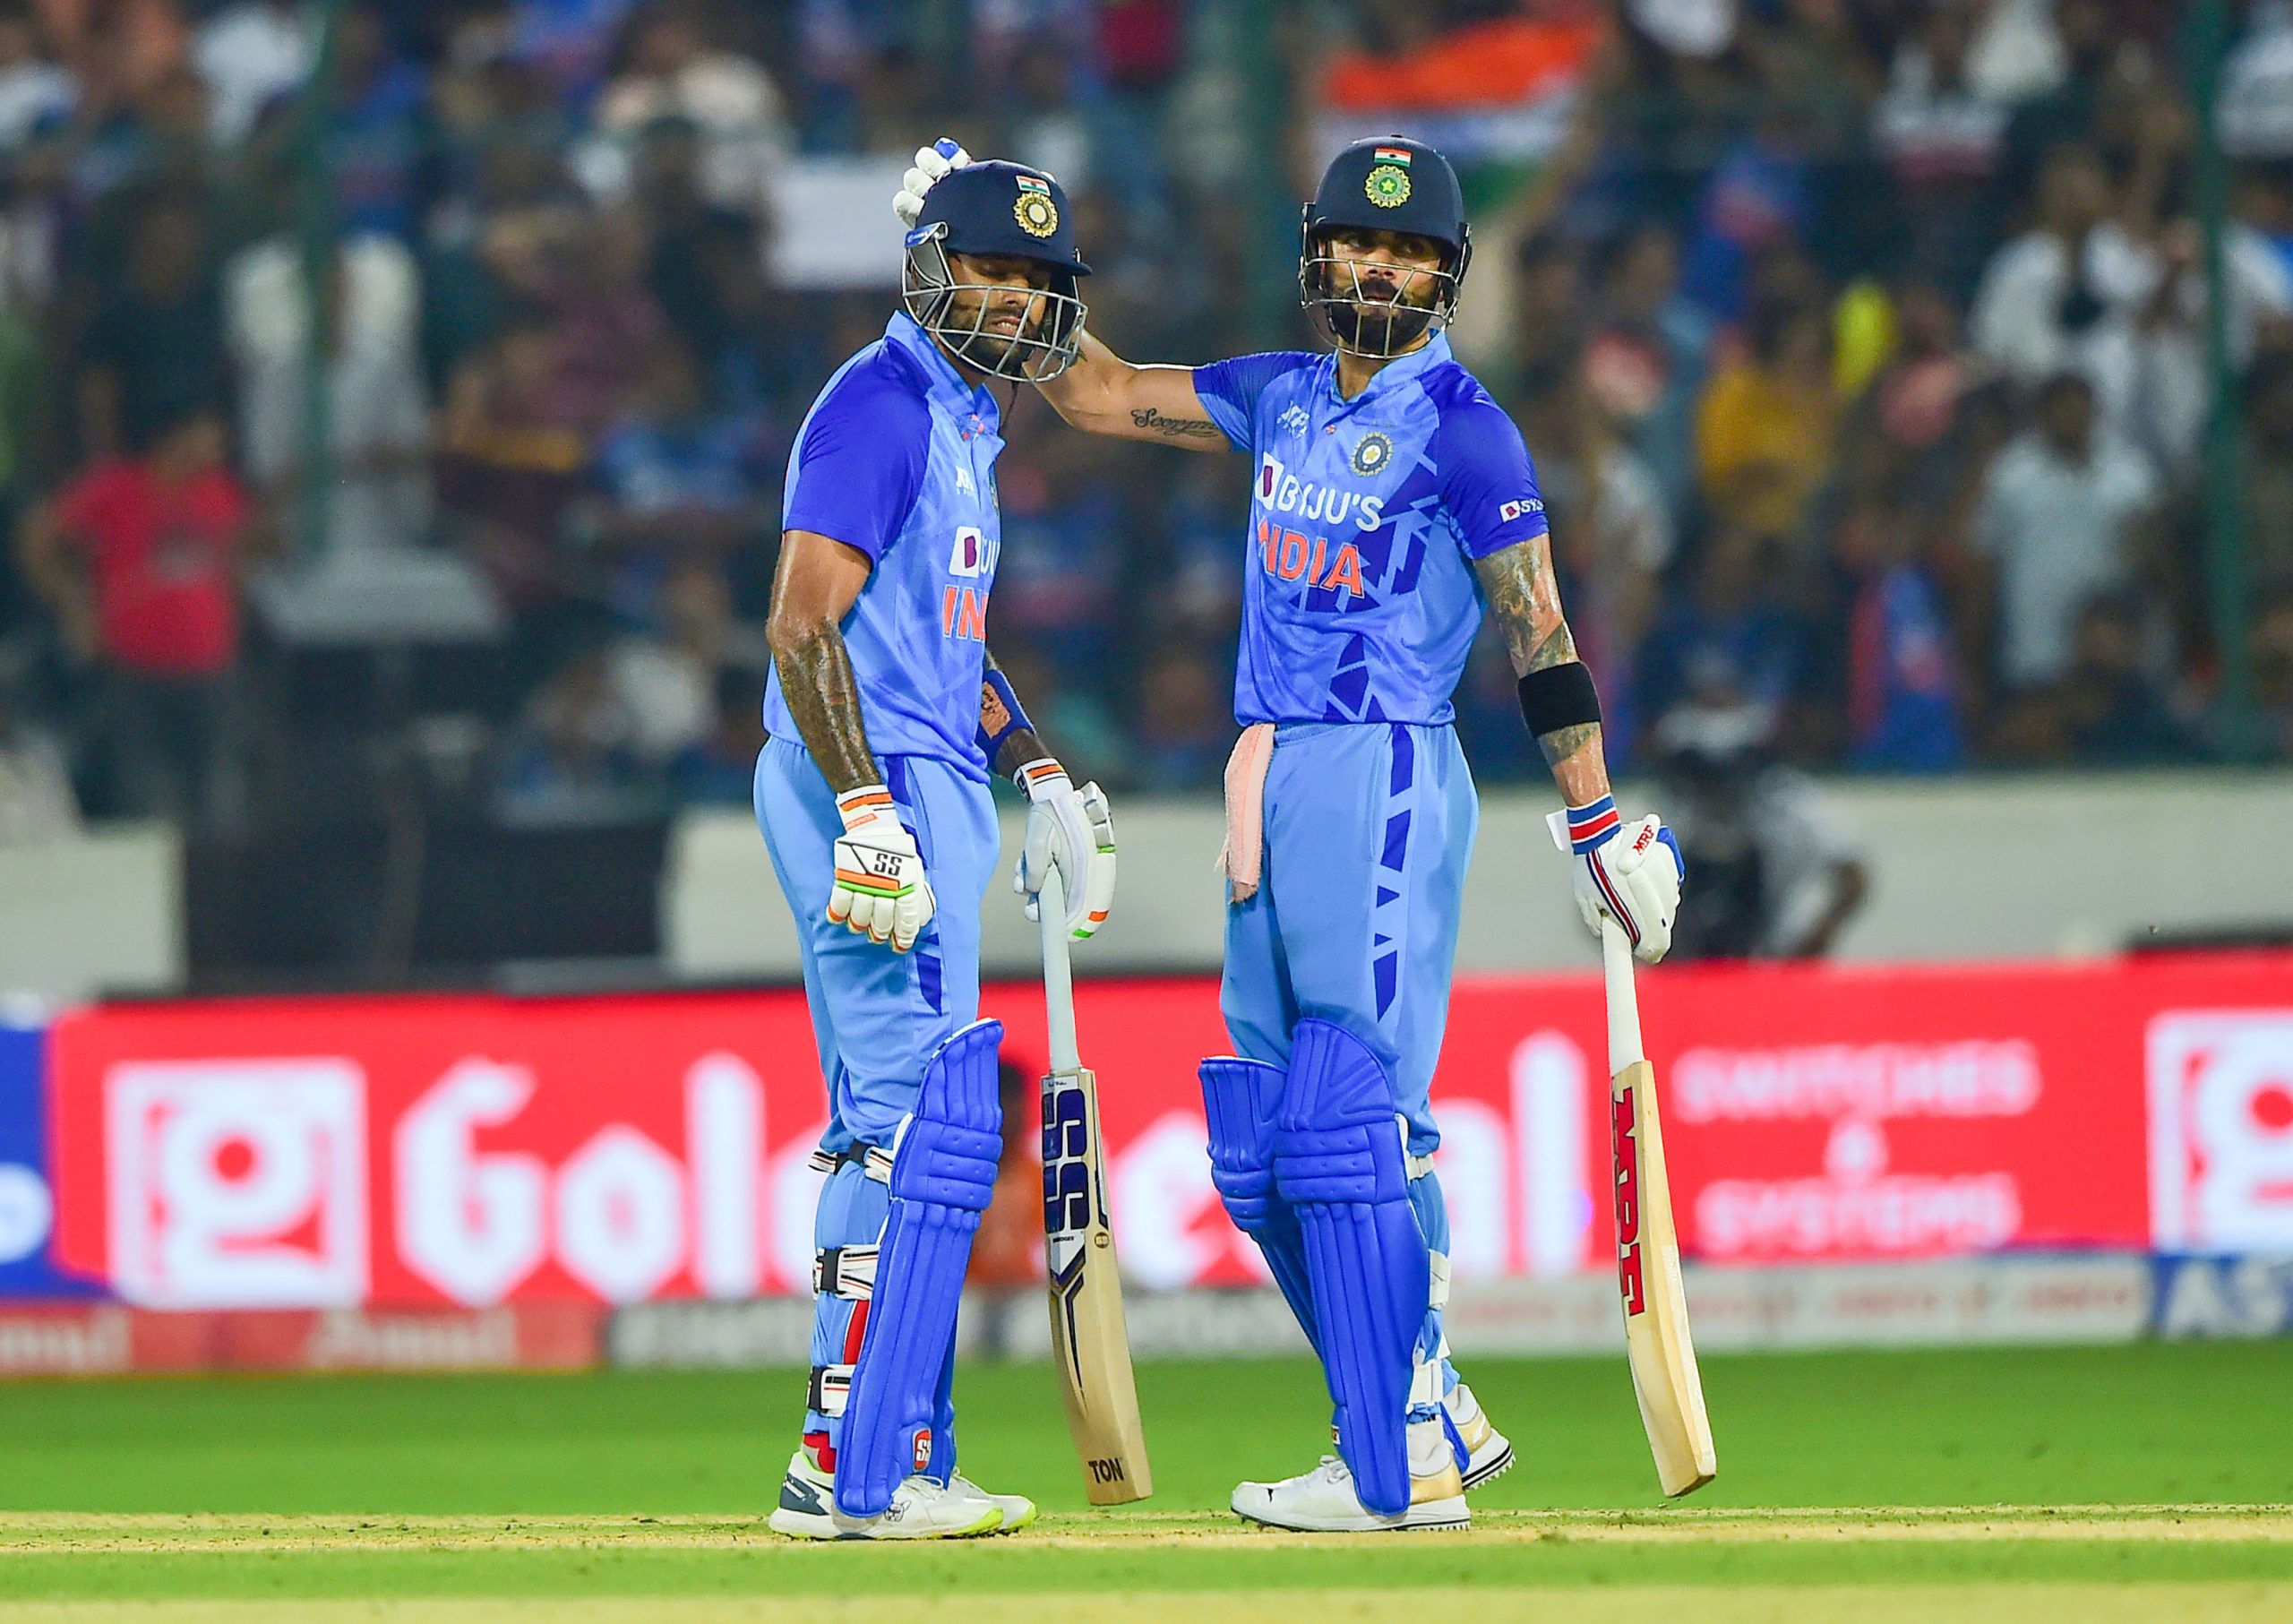 T20 World Cup 2022: What are India’s strengths and weaknesses